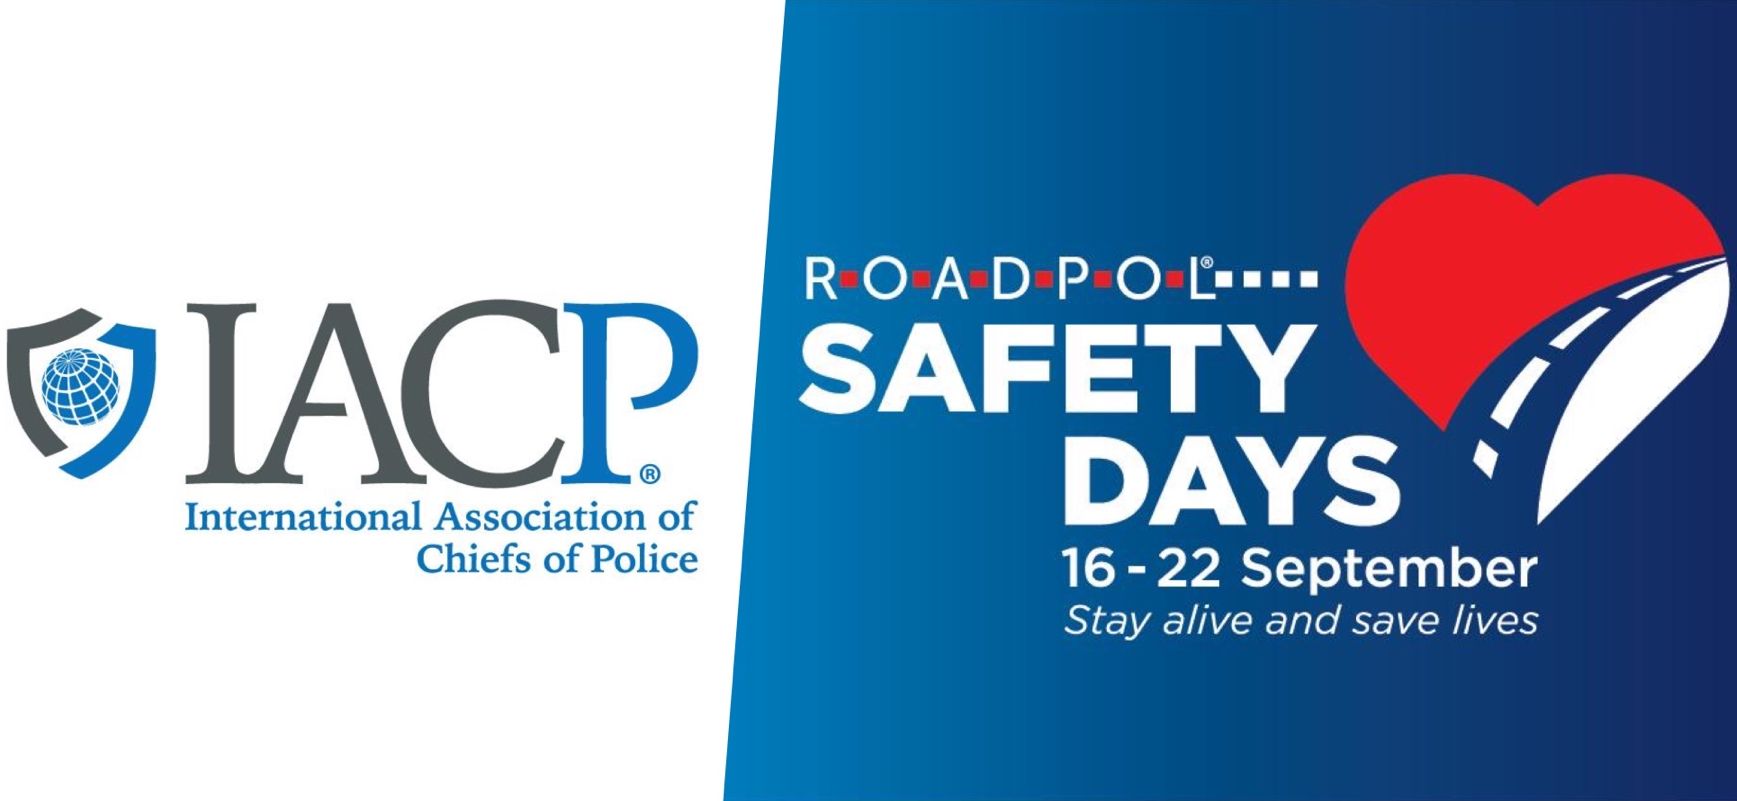 The International Association of Chiefs of Police Pledges Its Support For ROADPOL Safety Days